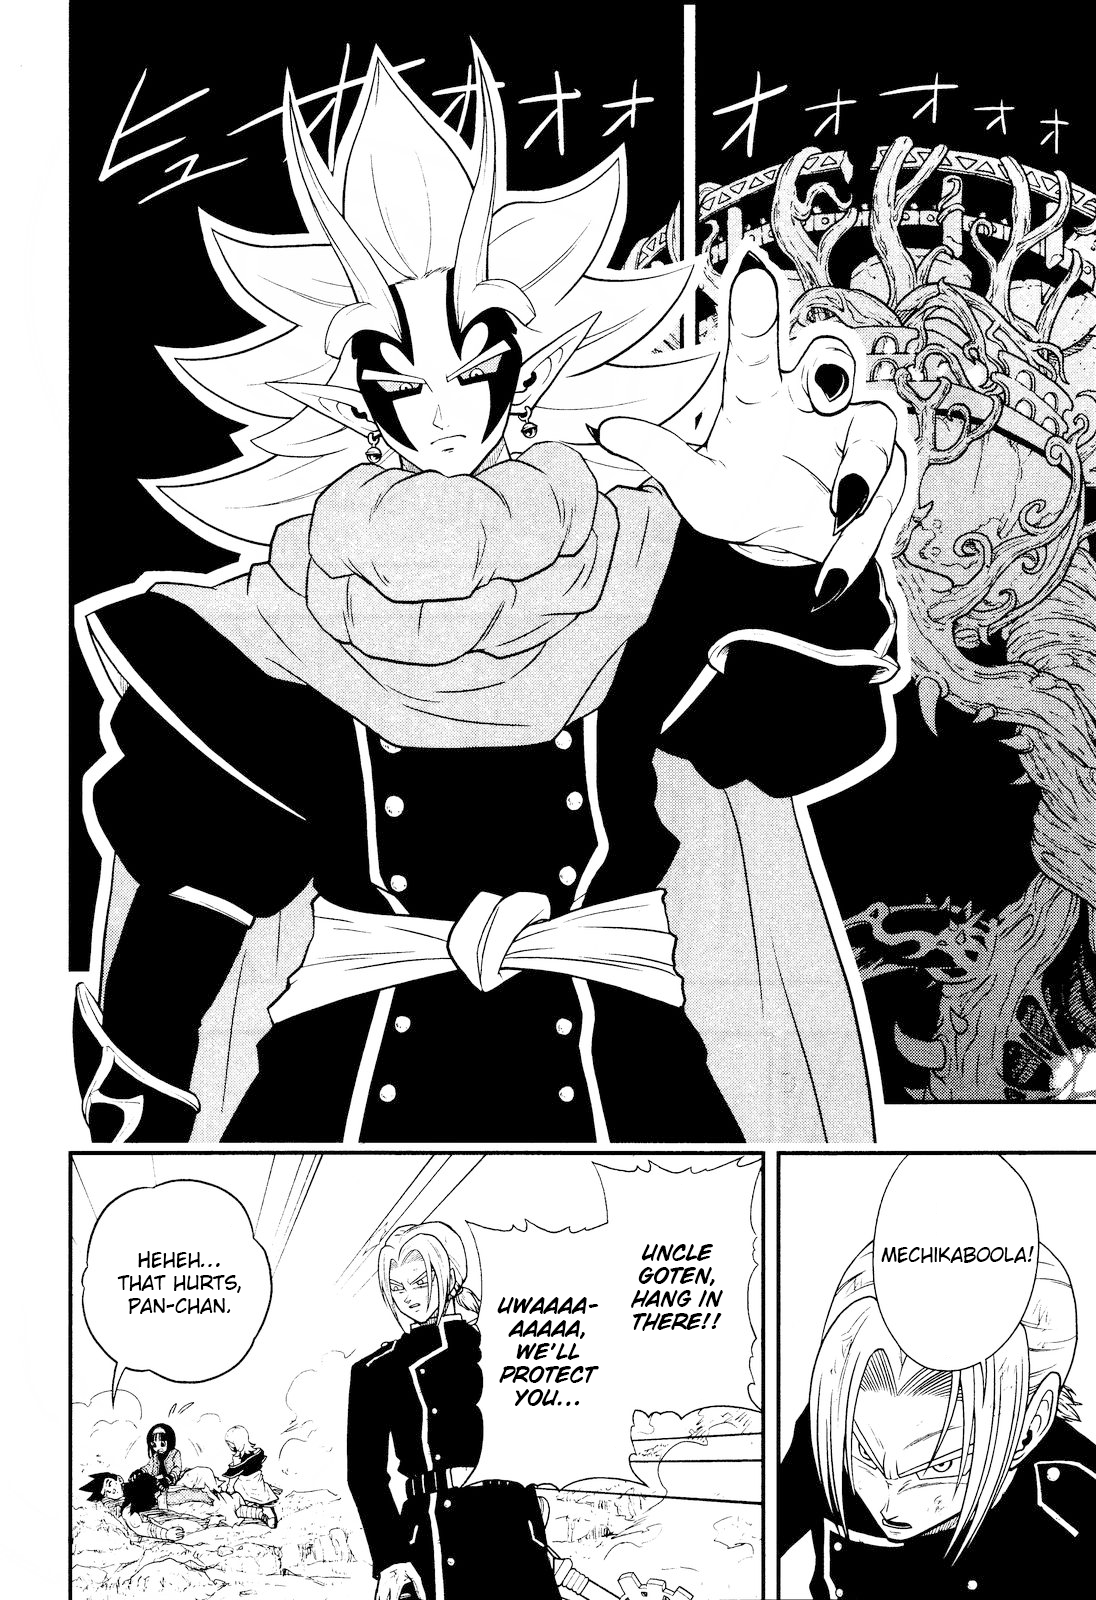 Super Dragon Ball Heroes: Dark Demon Realm Mission! Vol.3 Chapter 16: Travelling Across Time, Light And Darkness, Collide Their Forces Together!! - Picture 3